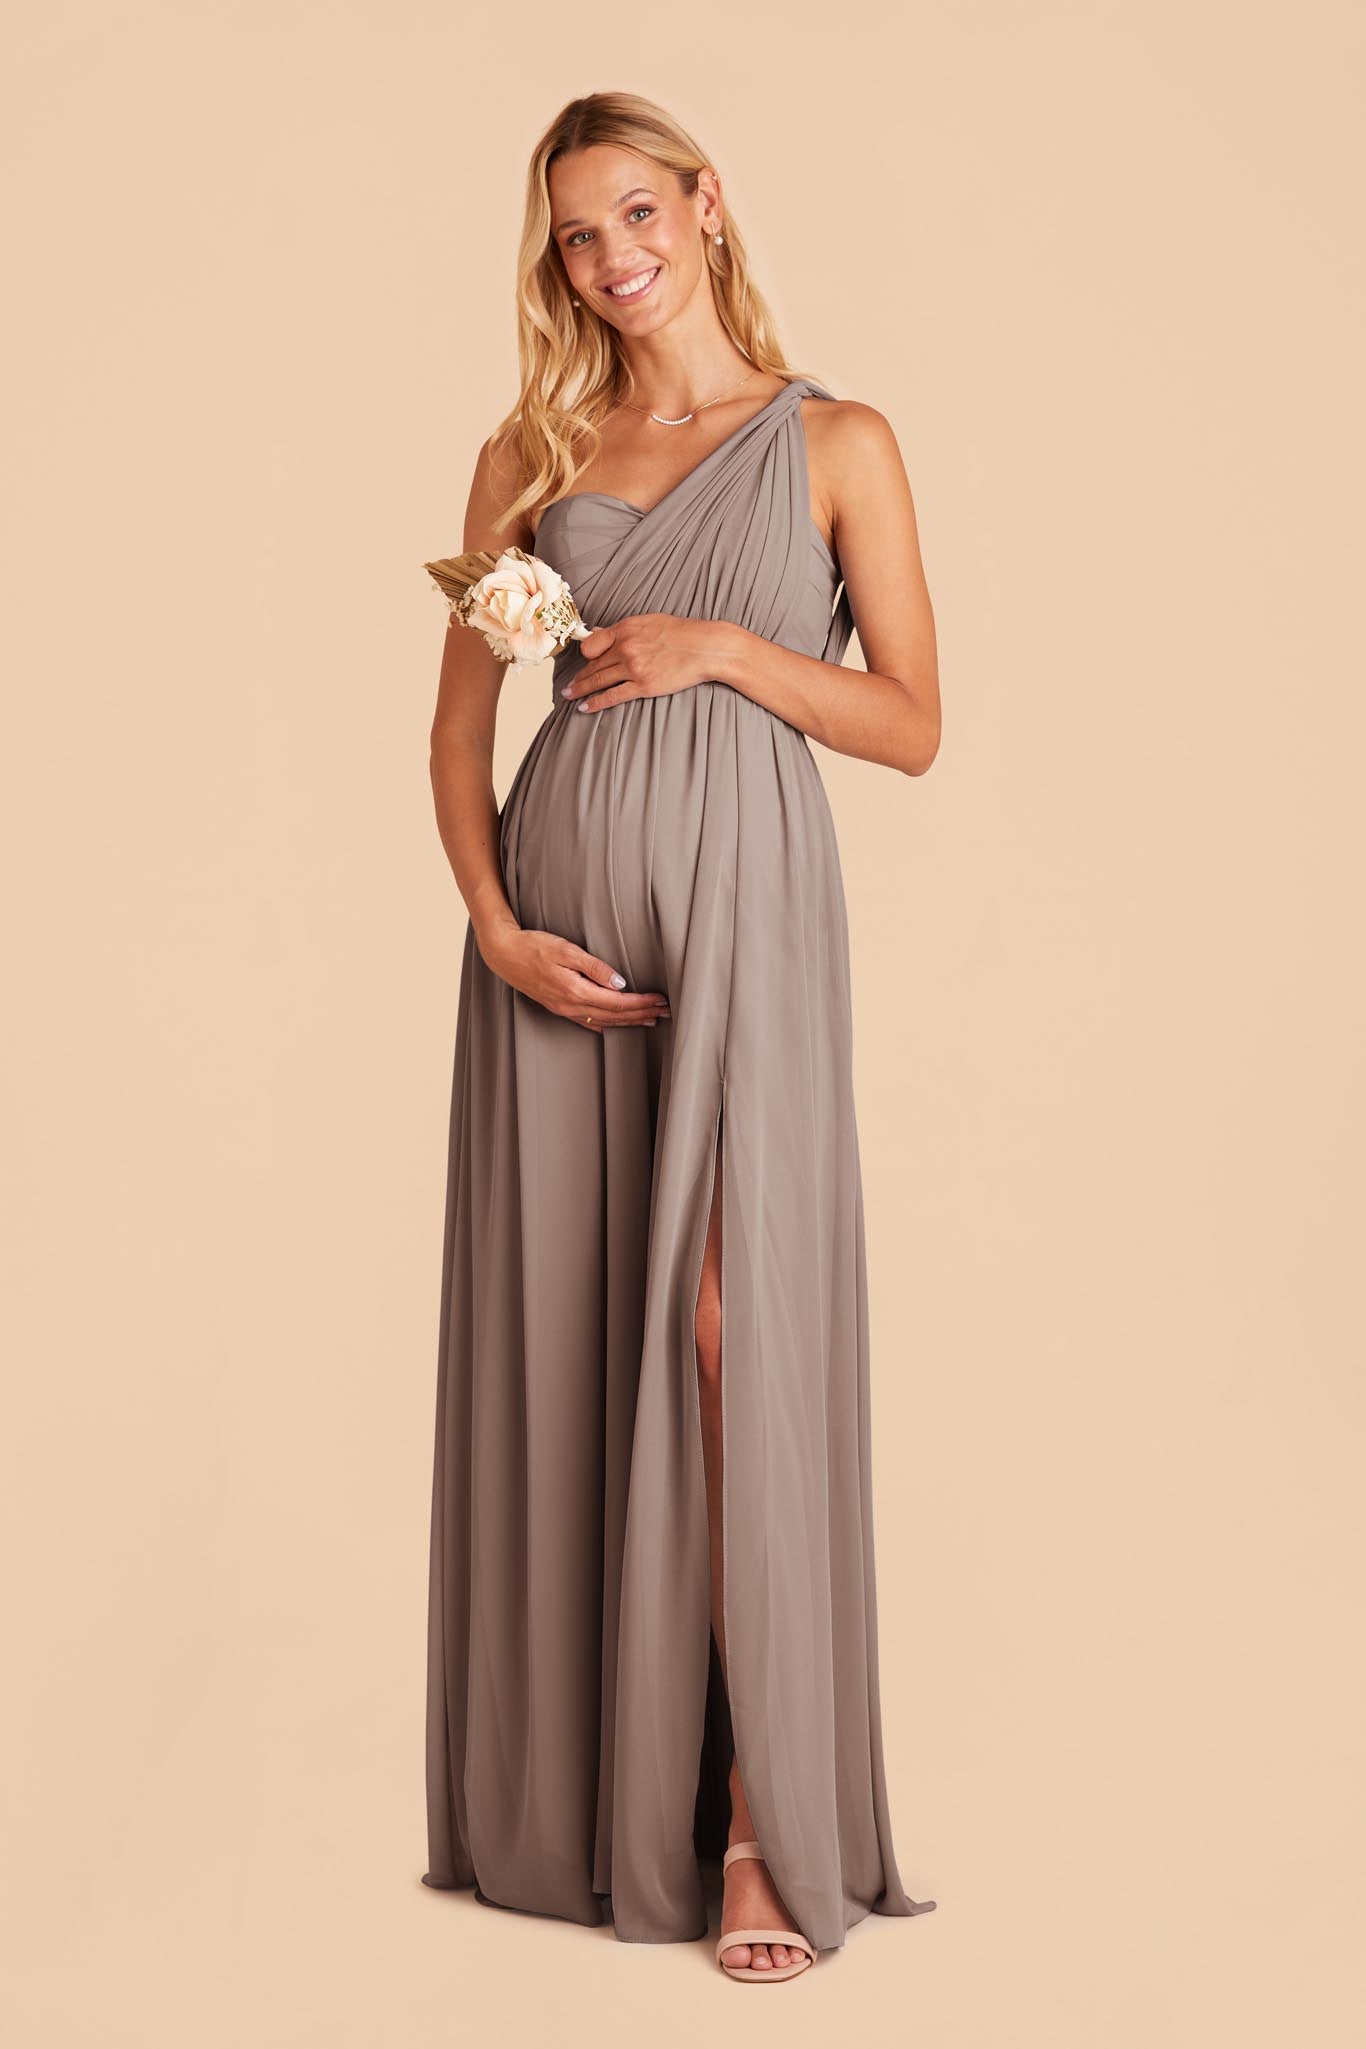 Toffee Grace Convertible Dress by Birdy Grey